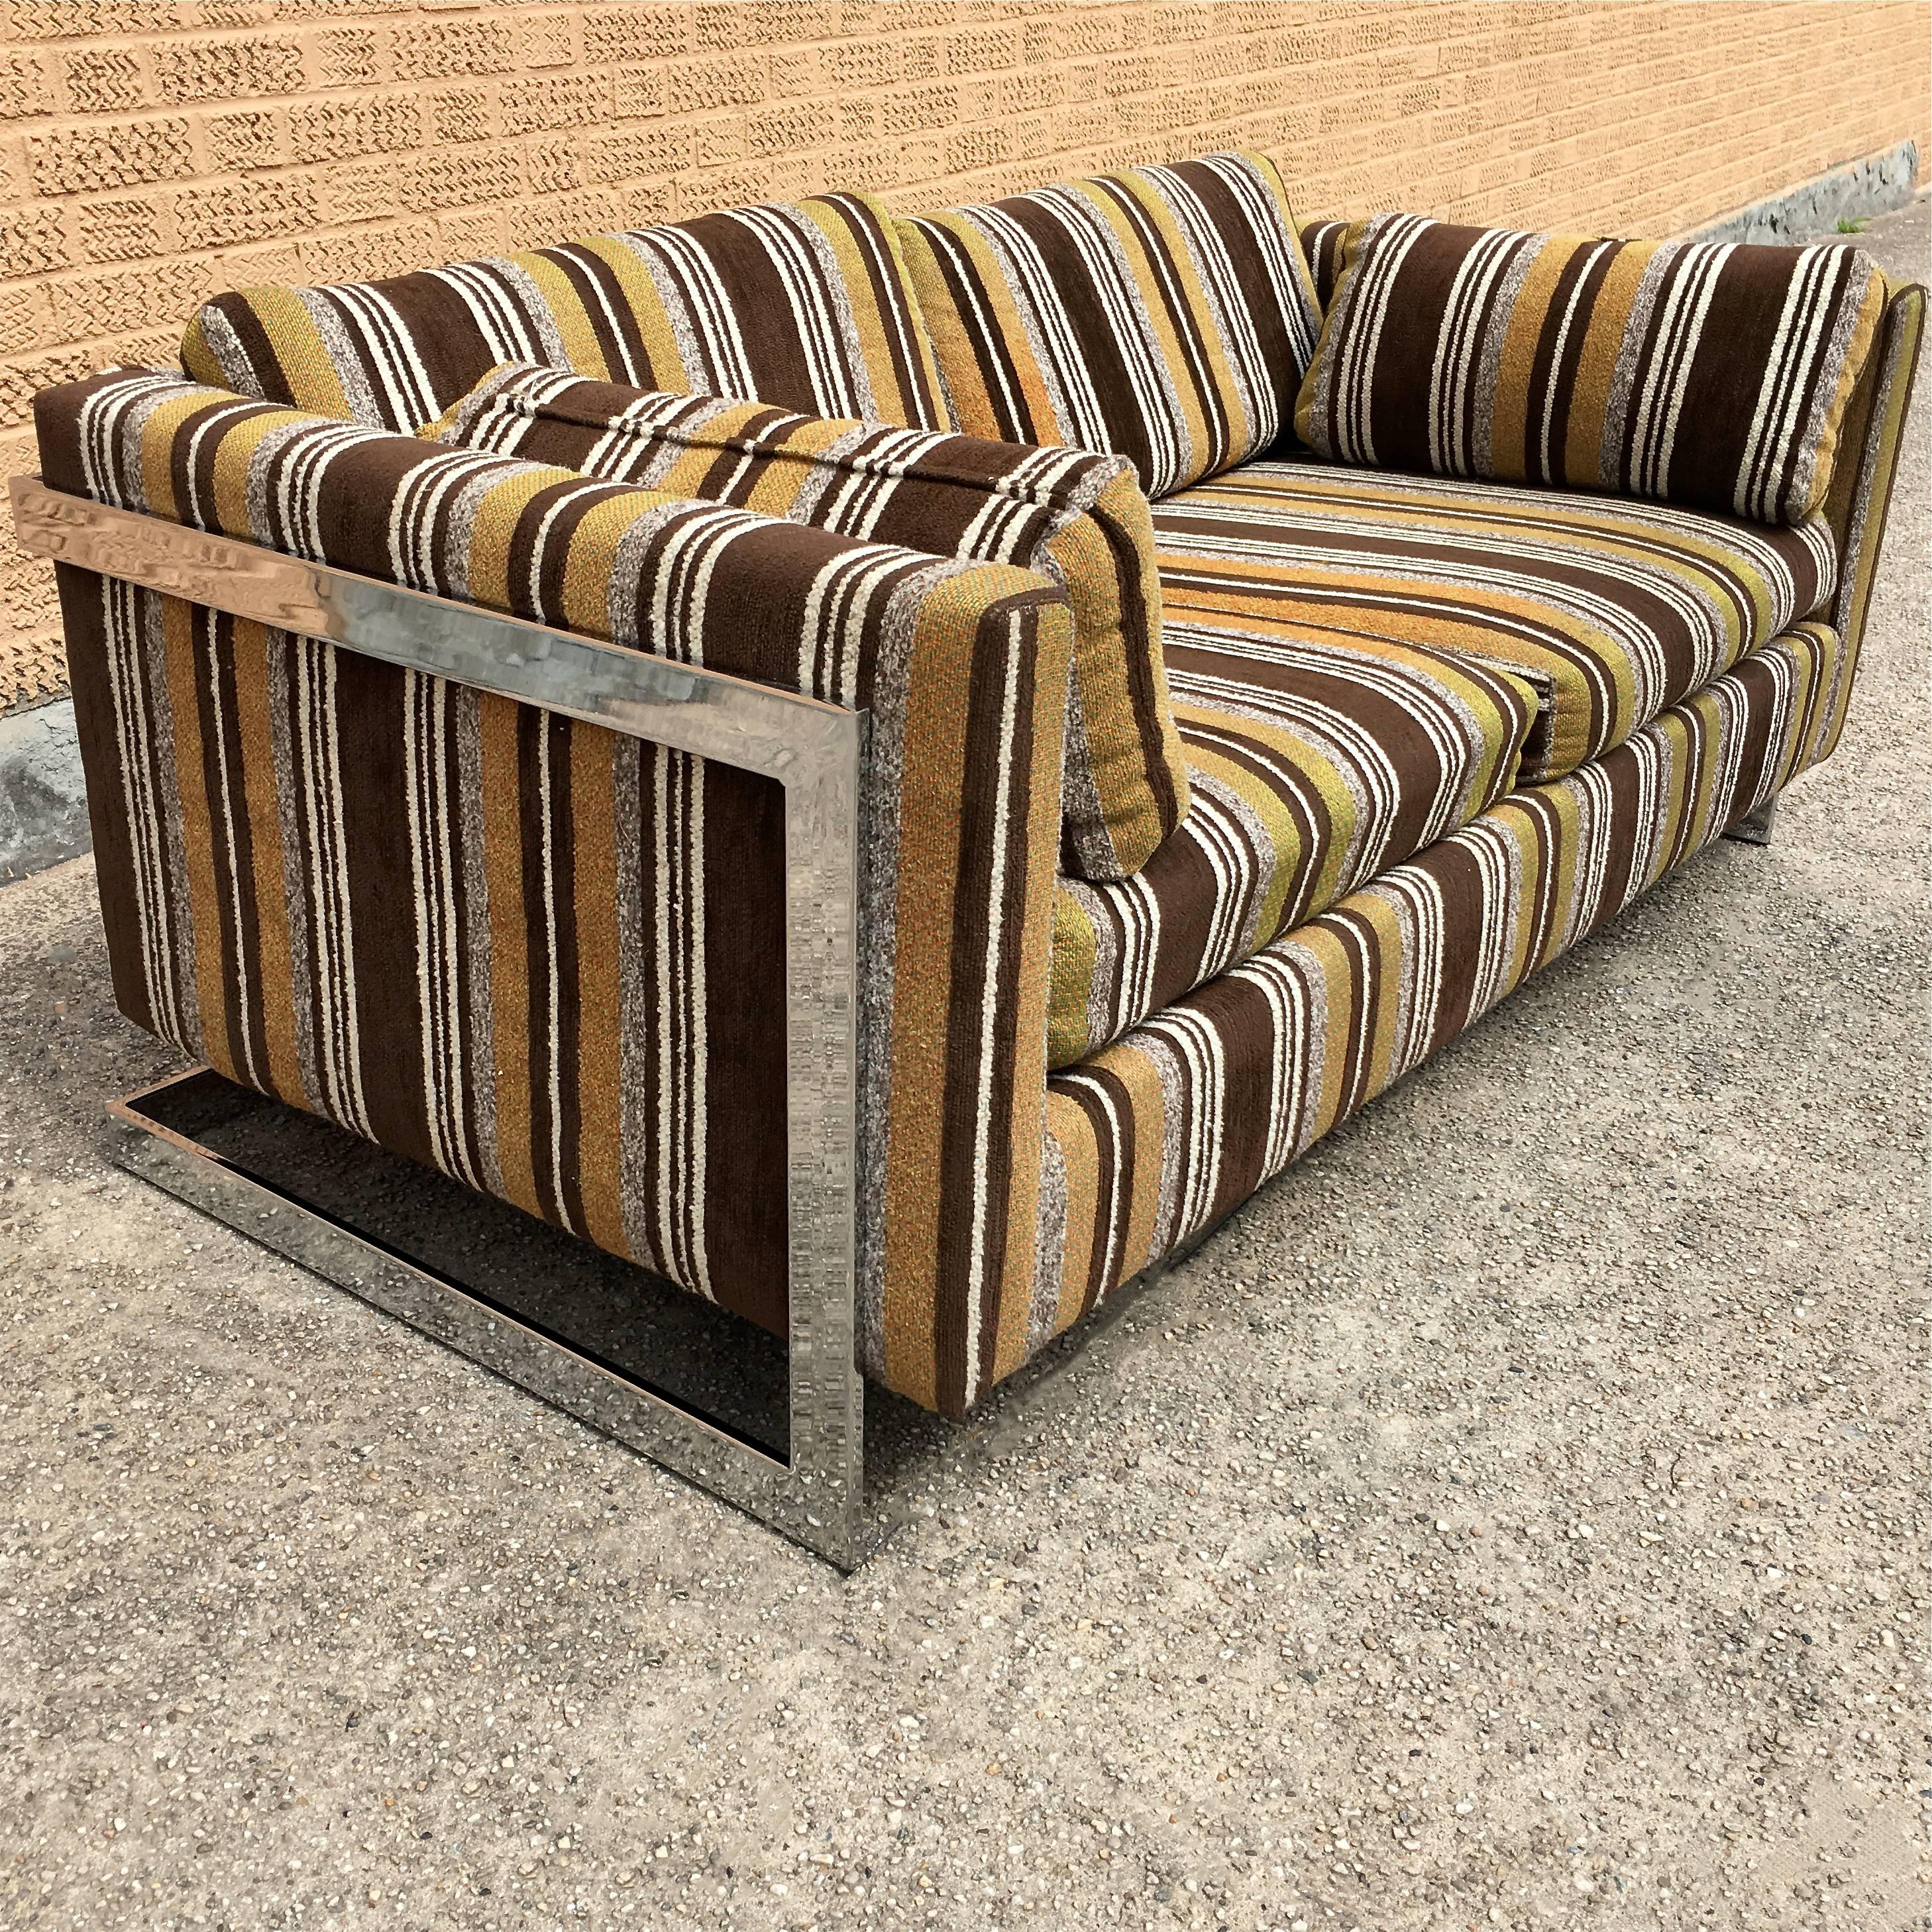 Mid-Century Modern, 1970s, chrome flat bar, loveseat sofa by Milo Baughman in it’s original striped woven blend upholstery in excellent condition.